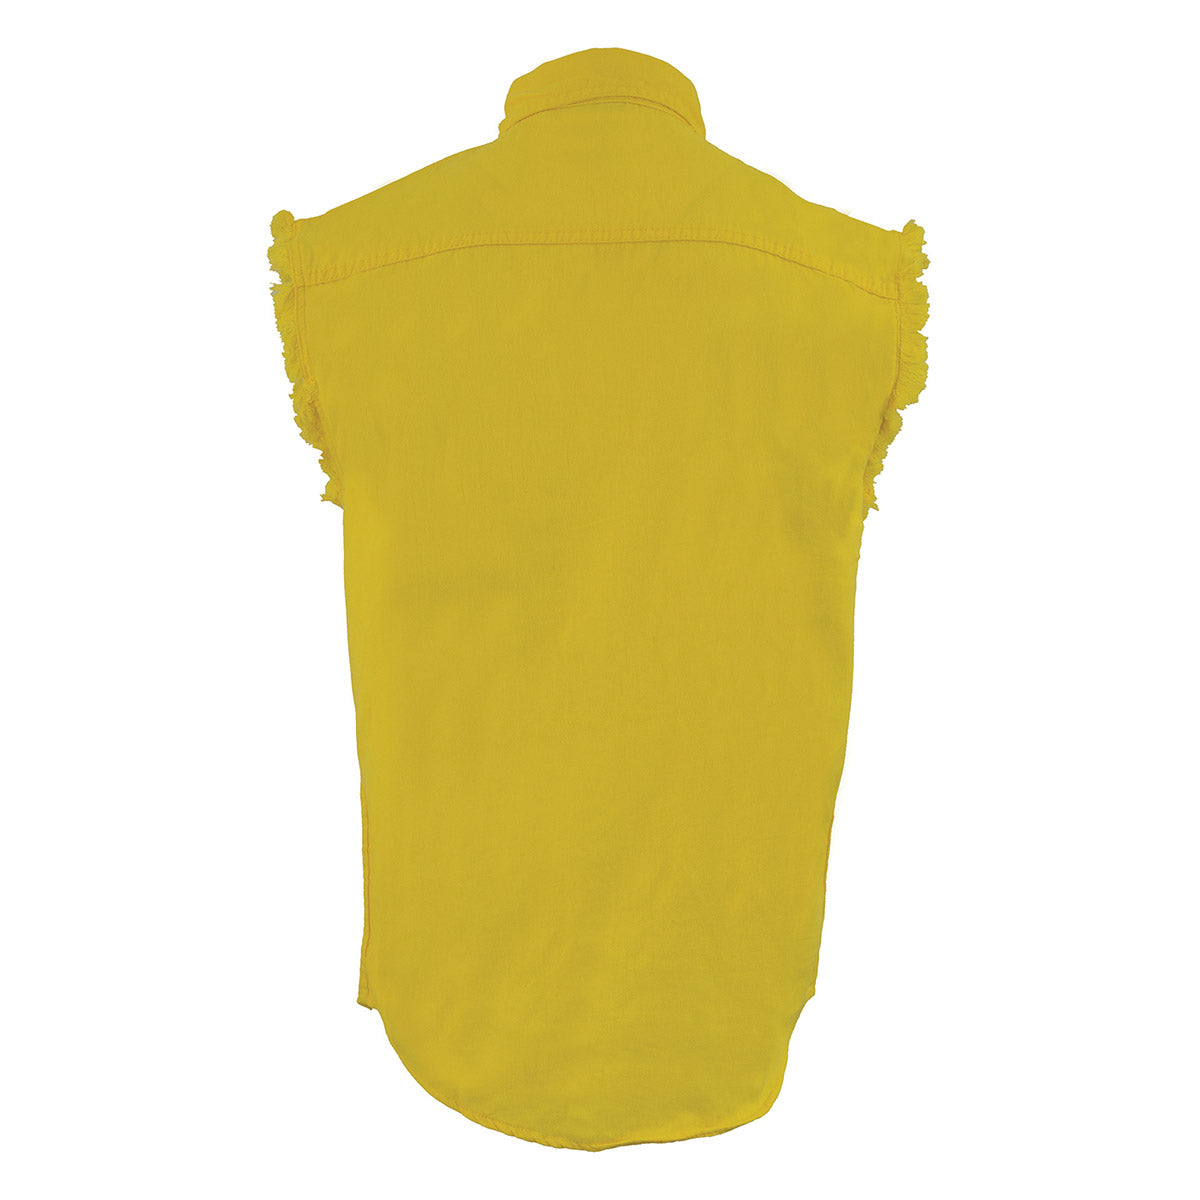 Milwaukee Leather DM4008 Men's Yellow Lightweight Denim Shirt with with Frayed Cut Off Sleeveless Look